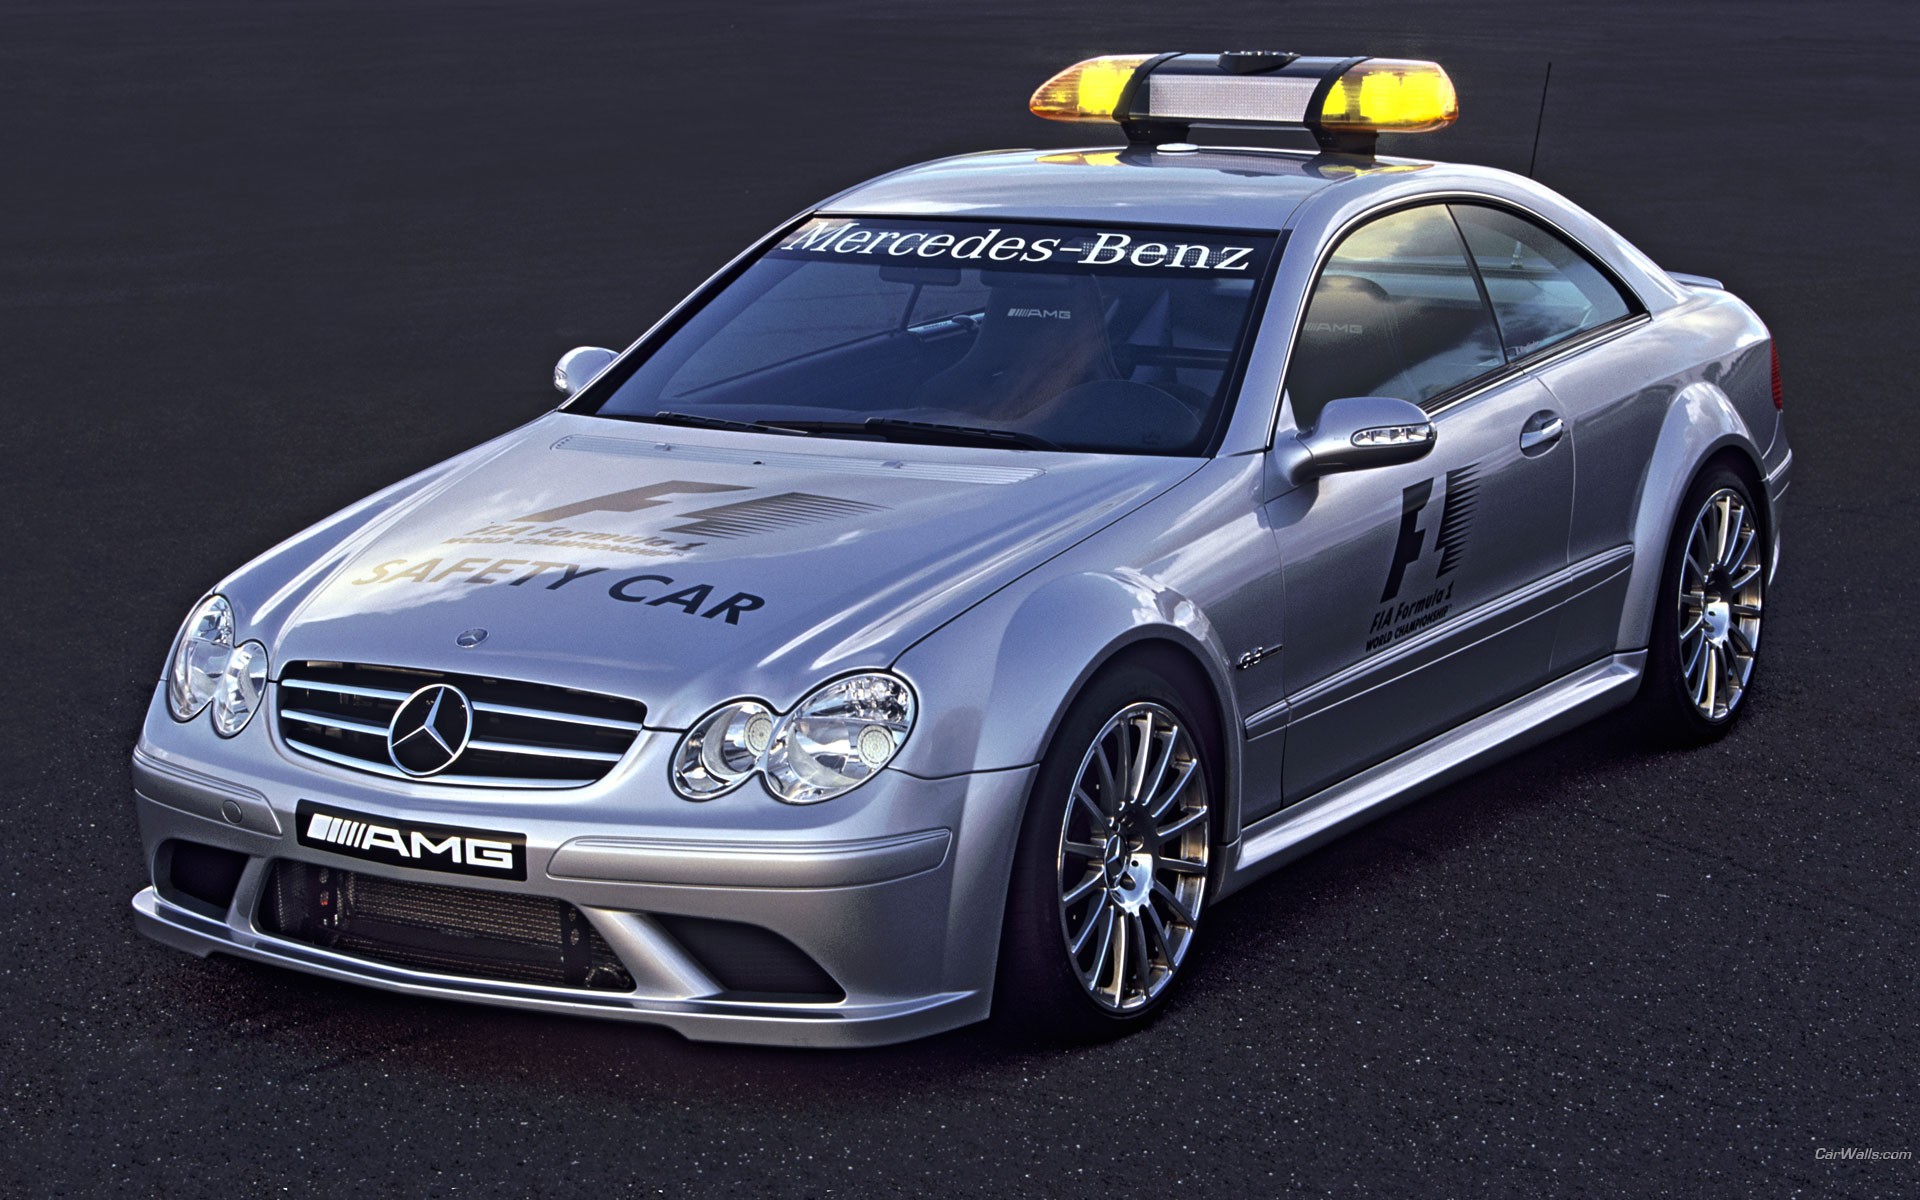 cars, Vehicles, Safety, Cars, Mercedes benz Wallpaper